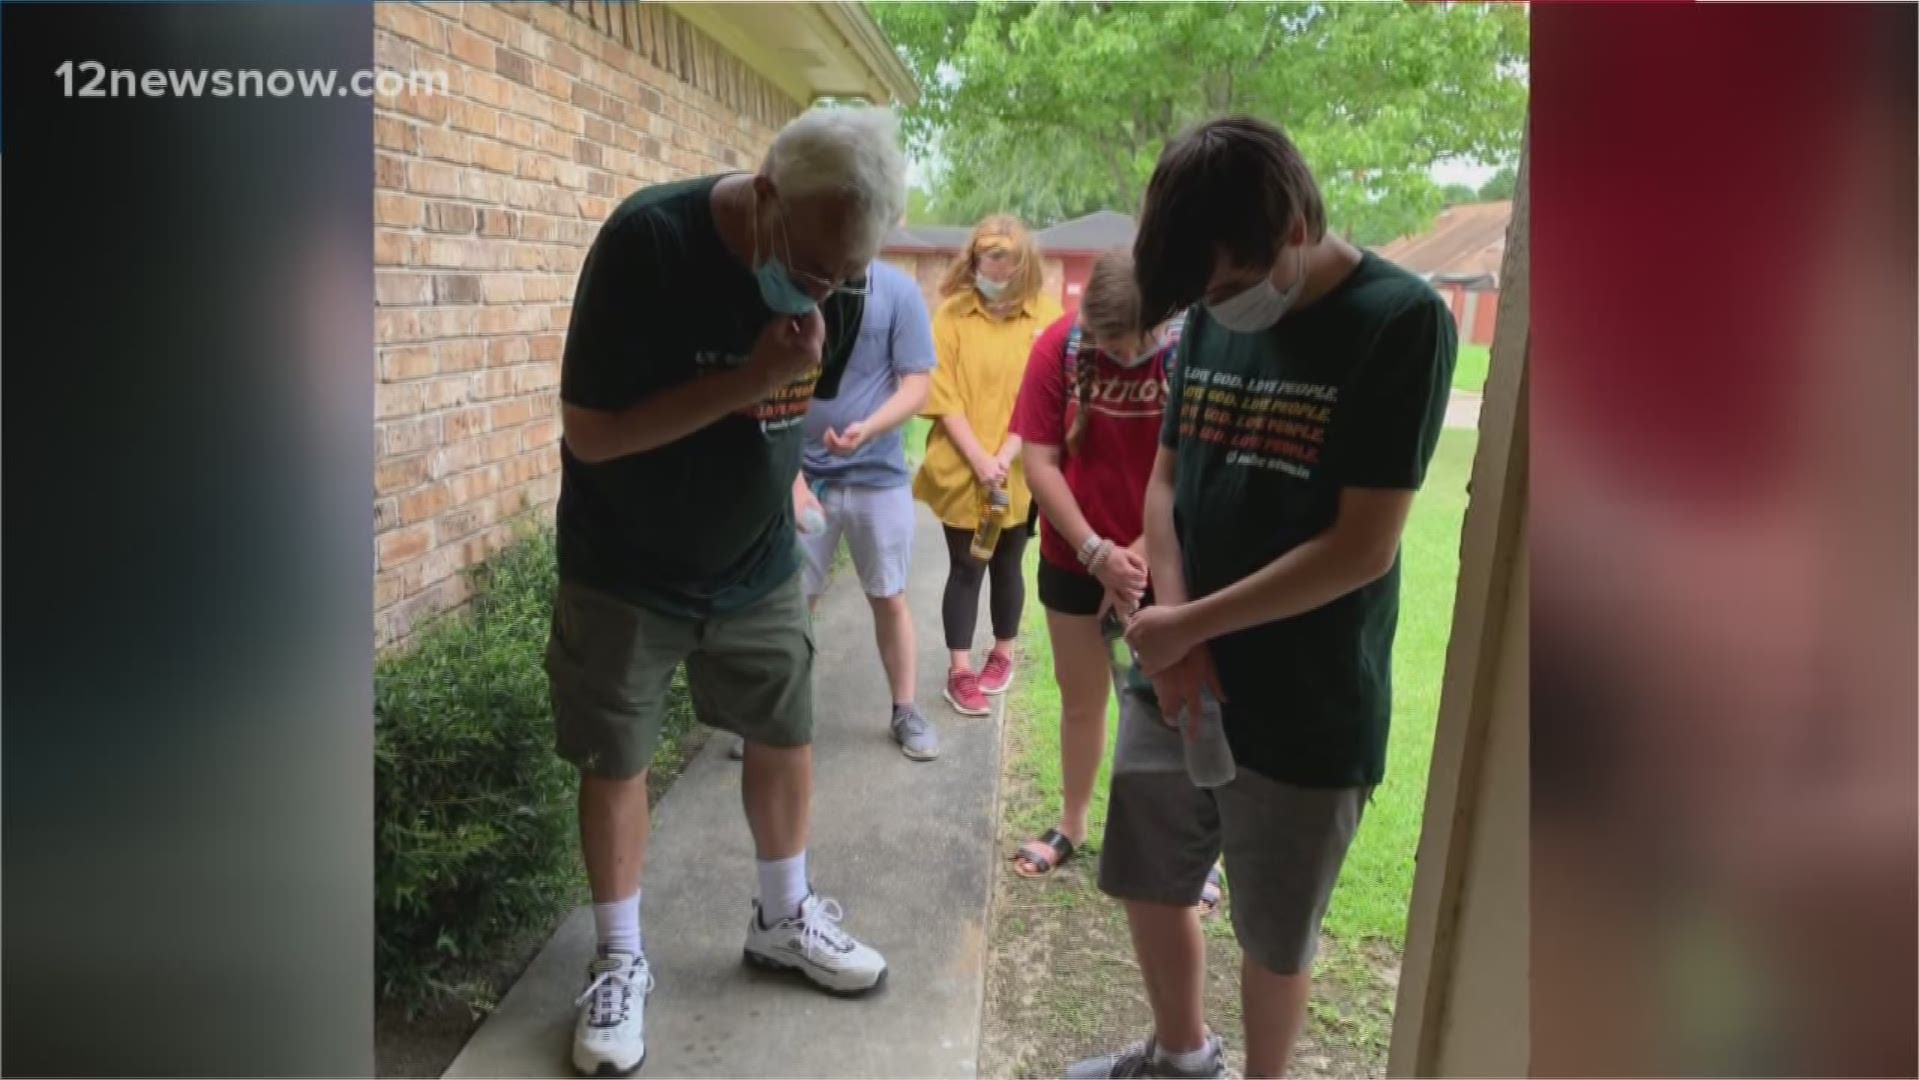 The group is going door to door asking families how they can pray for them for the rest of this week.